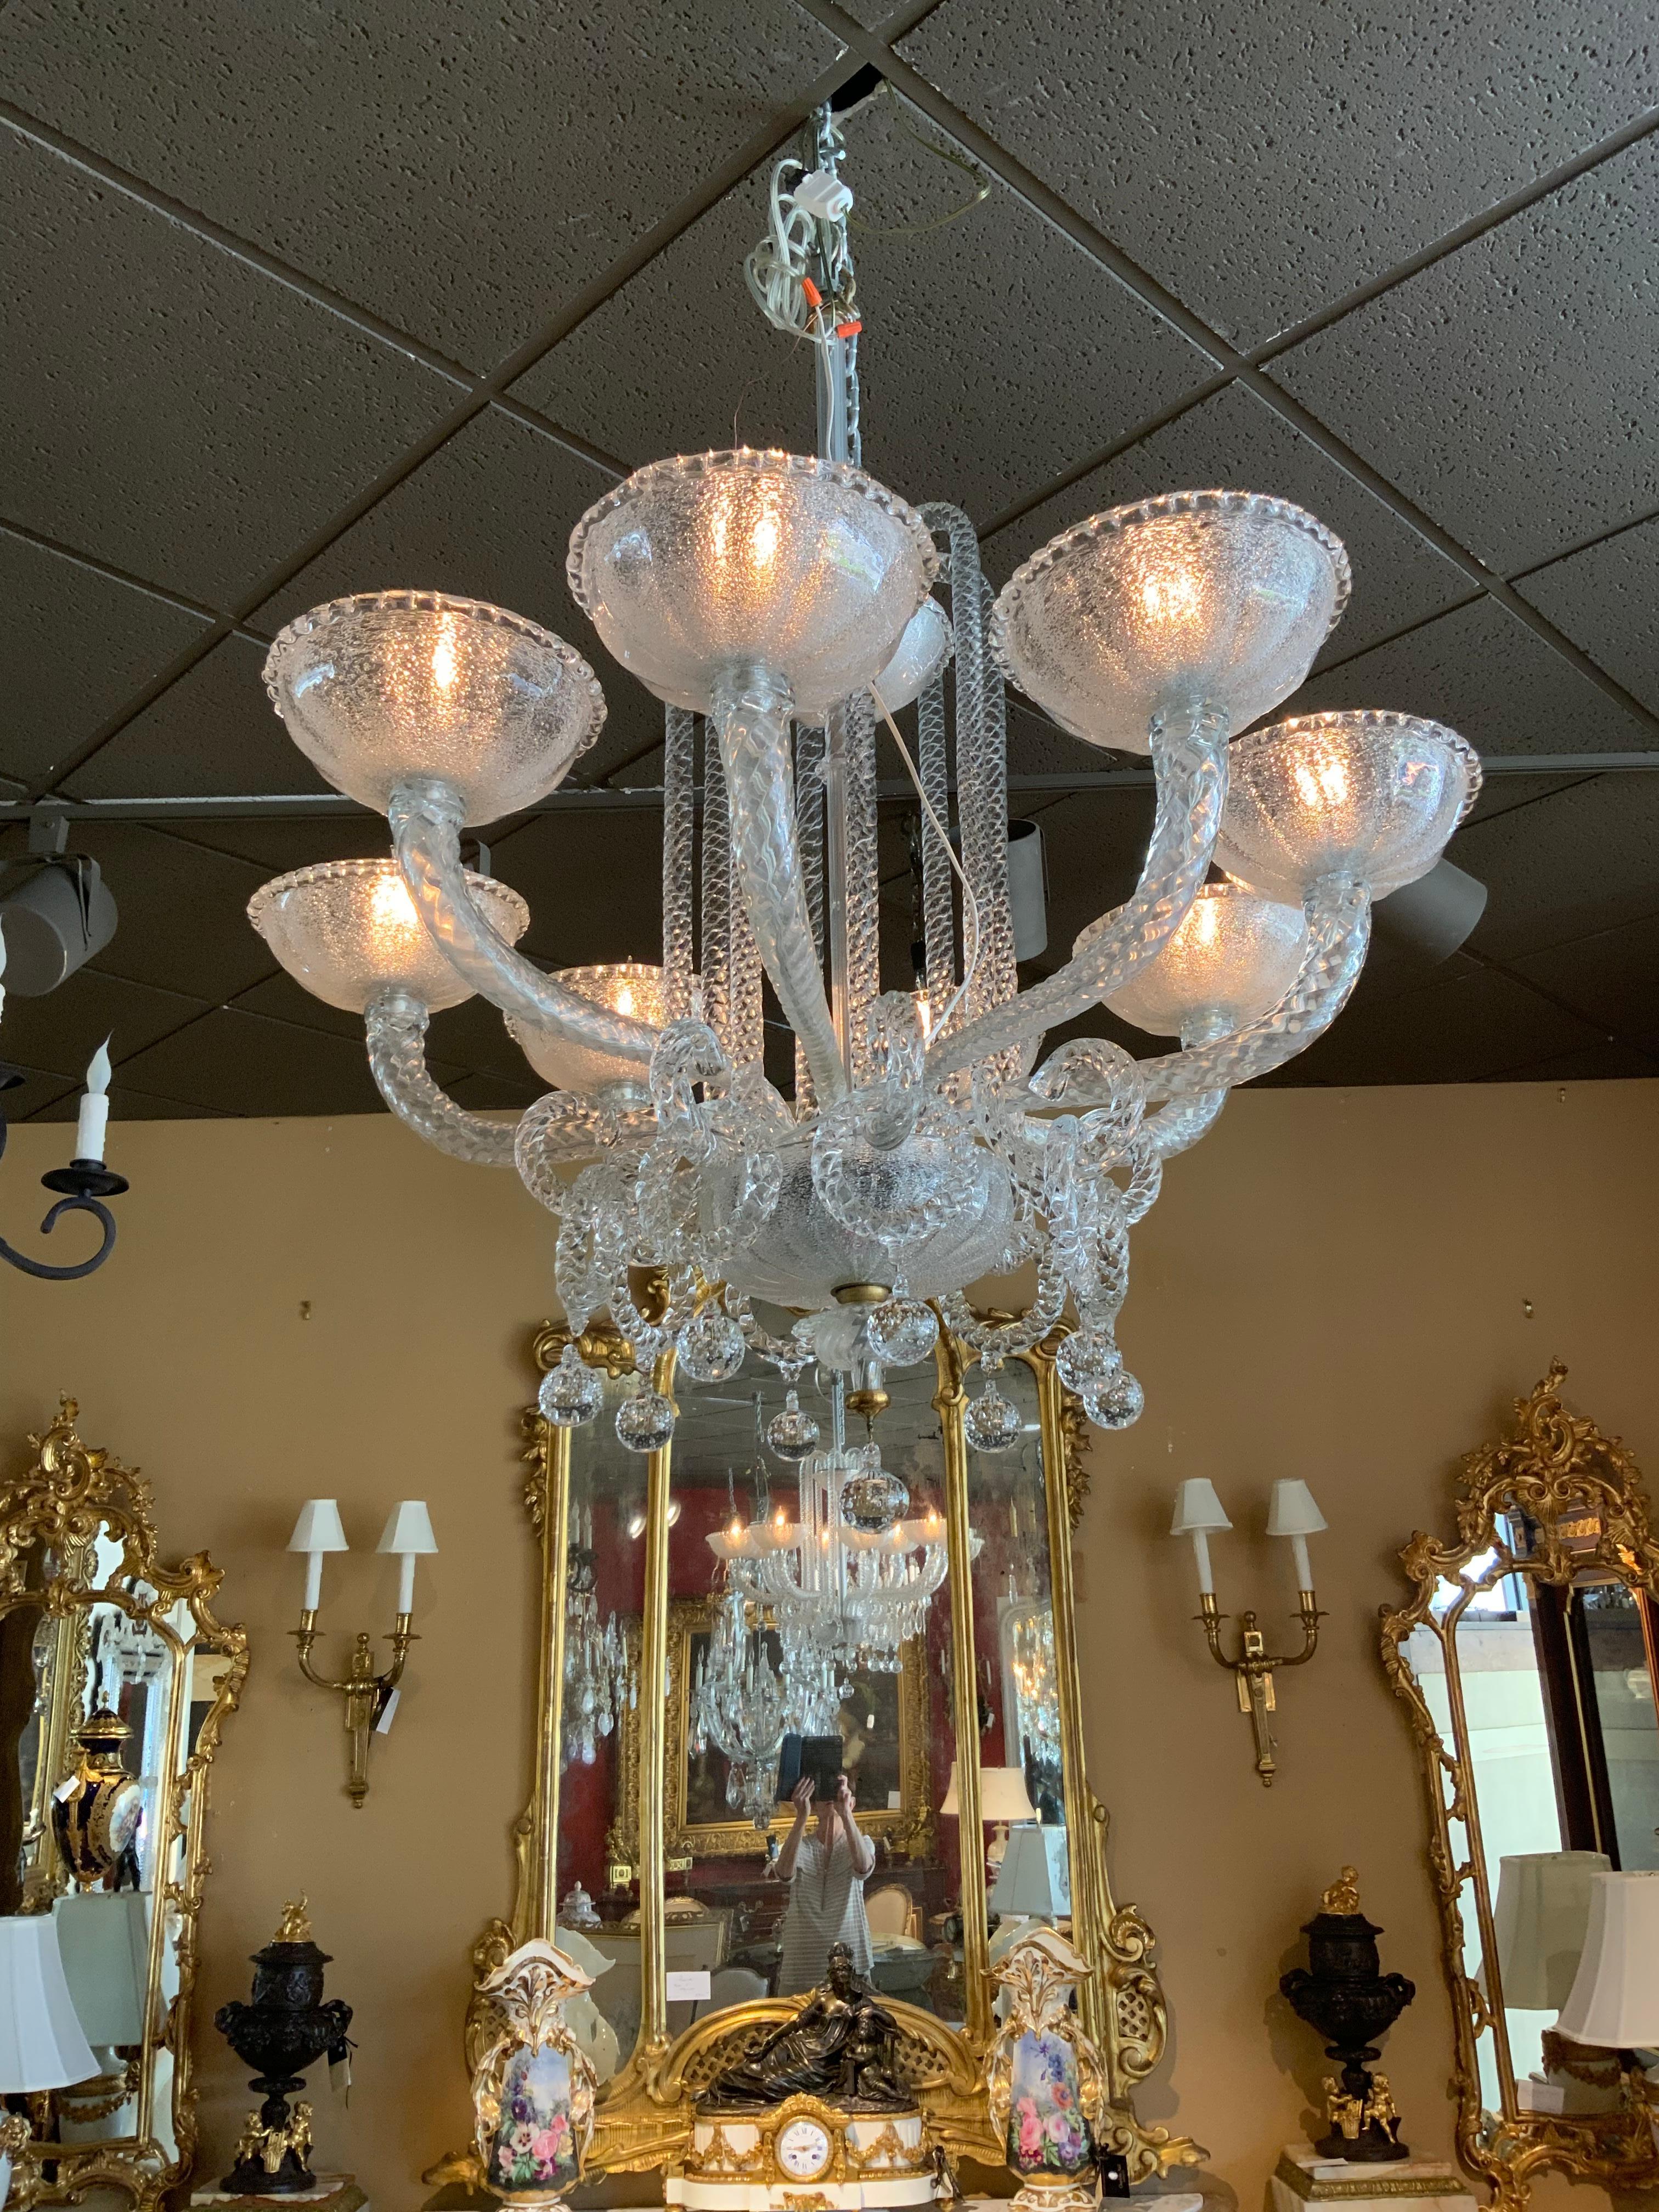 This amazing chandelier is a Murano chandelier with eight bobeches
That are Murano glass. It has a glass standard with eight arms which
Curve gracefully upward. glass rings with glass balls add depth to this
Incredible design. The glass is in a